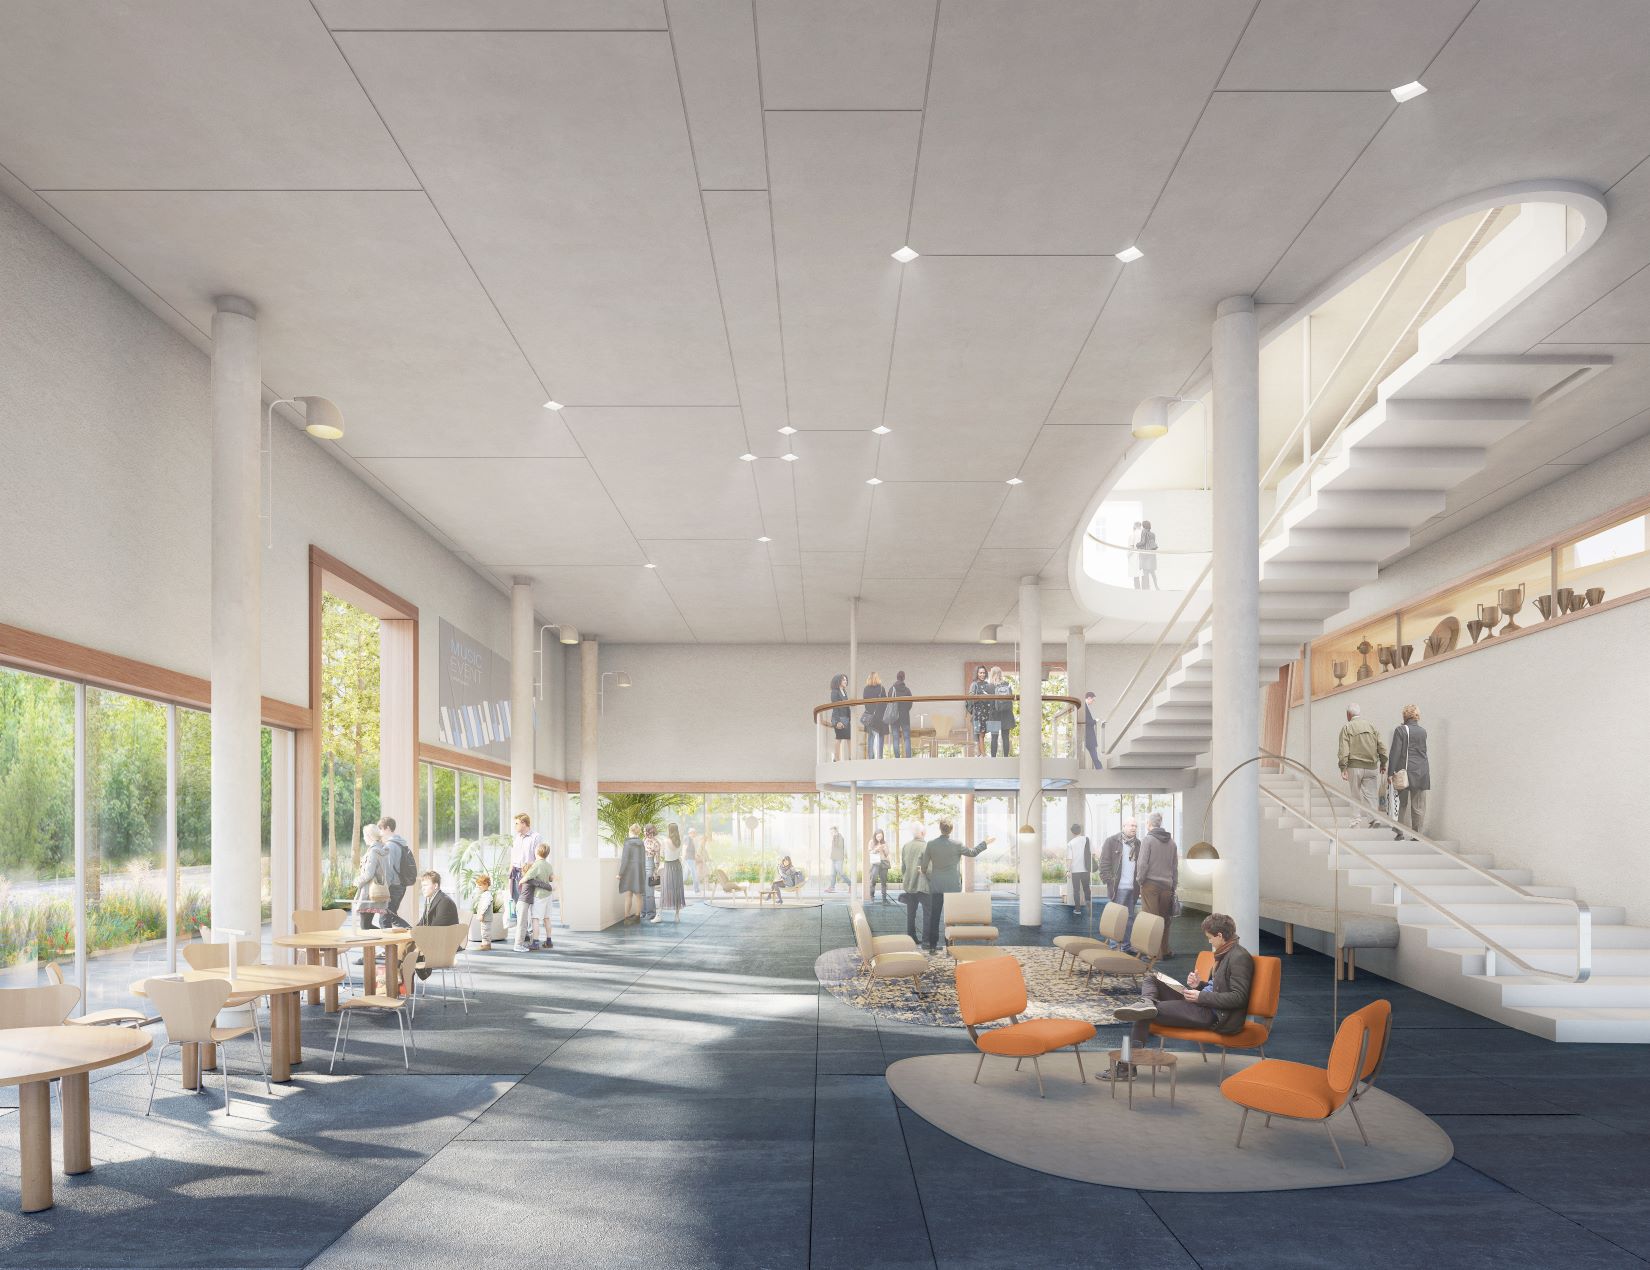 A render of the inside of alumni house daytime